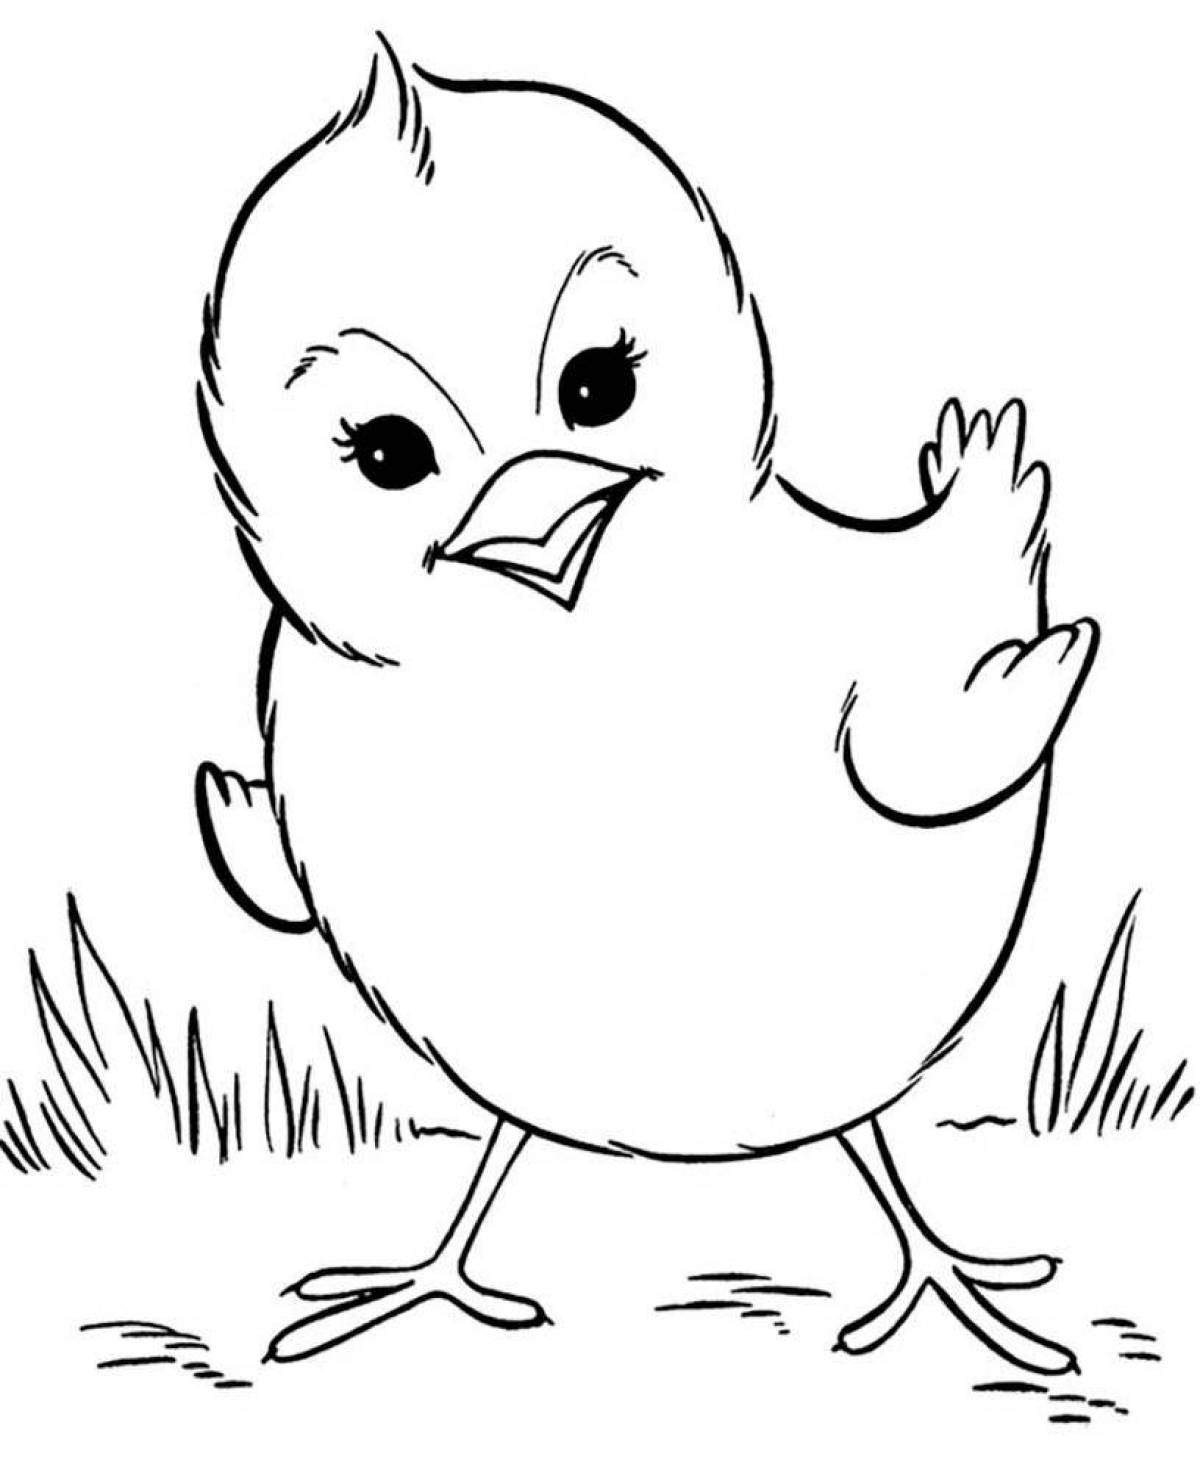 Chicken and duckling fun coloring book